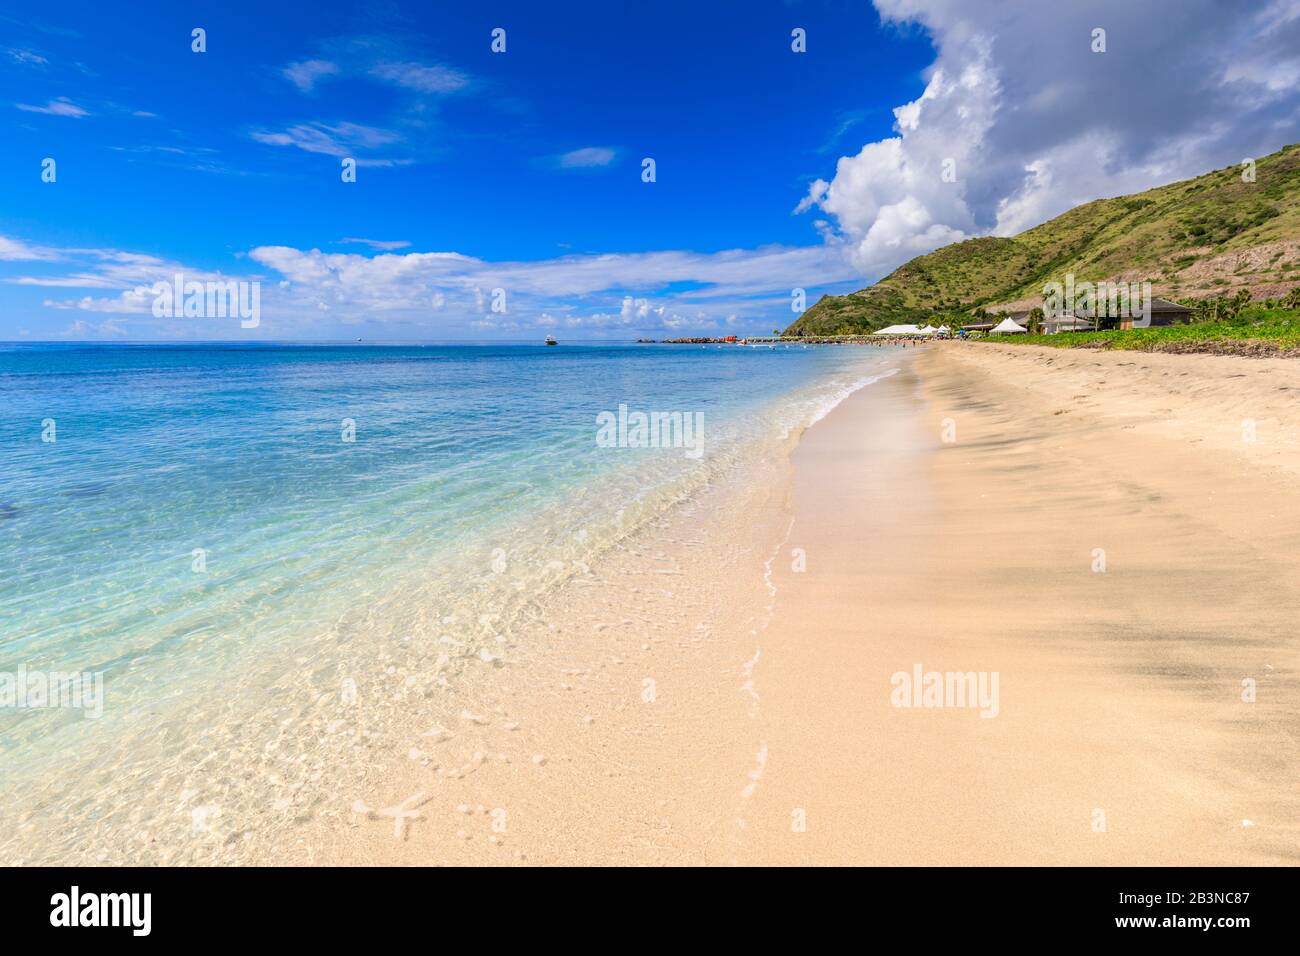 Bella Spiaggia, Mare Turchese, Spiaggia Di Carambola, South Friars Bay, St. Kitts, St. Kitts E Nevis, Isole Leeward, Indie Occidentali, Caraibi, Central Am Foto Stock